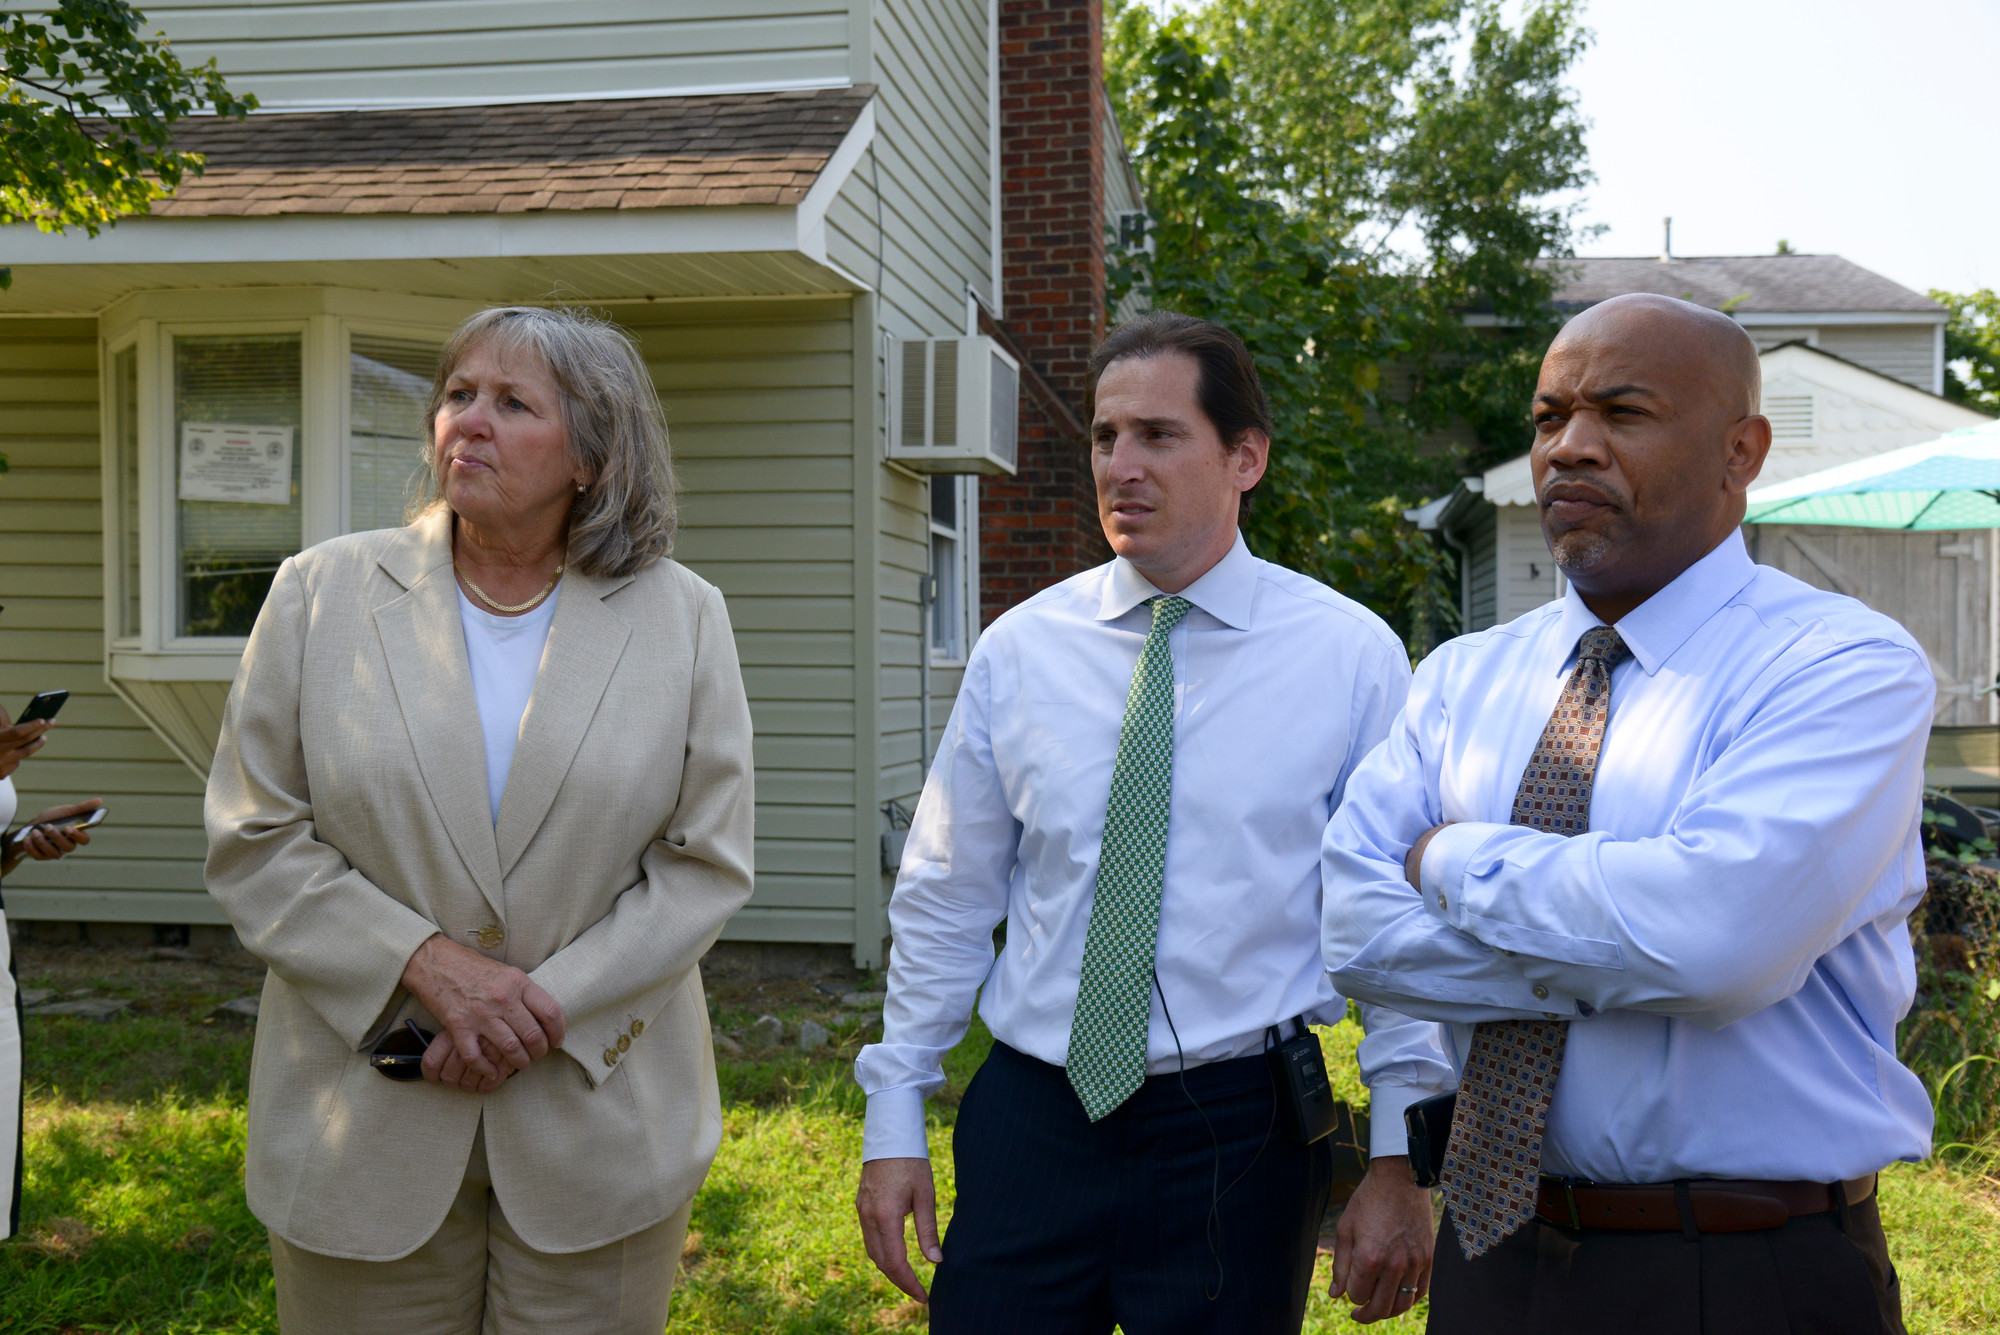 Officials took a tour of abandoned houses in Bay Park. From left  were County Legislator Denise Ford, State Assemblyman Todd Kaminsky and Assembly Speaker Carl E. Heastie.